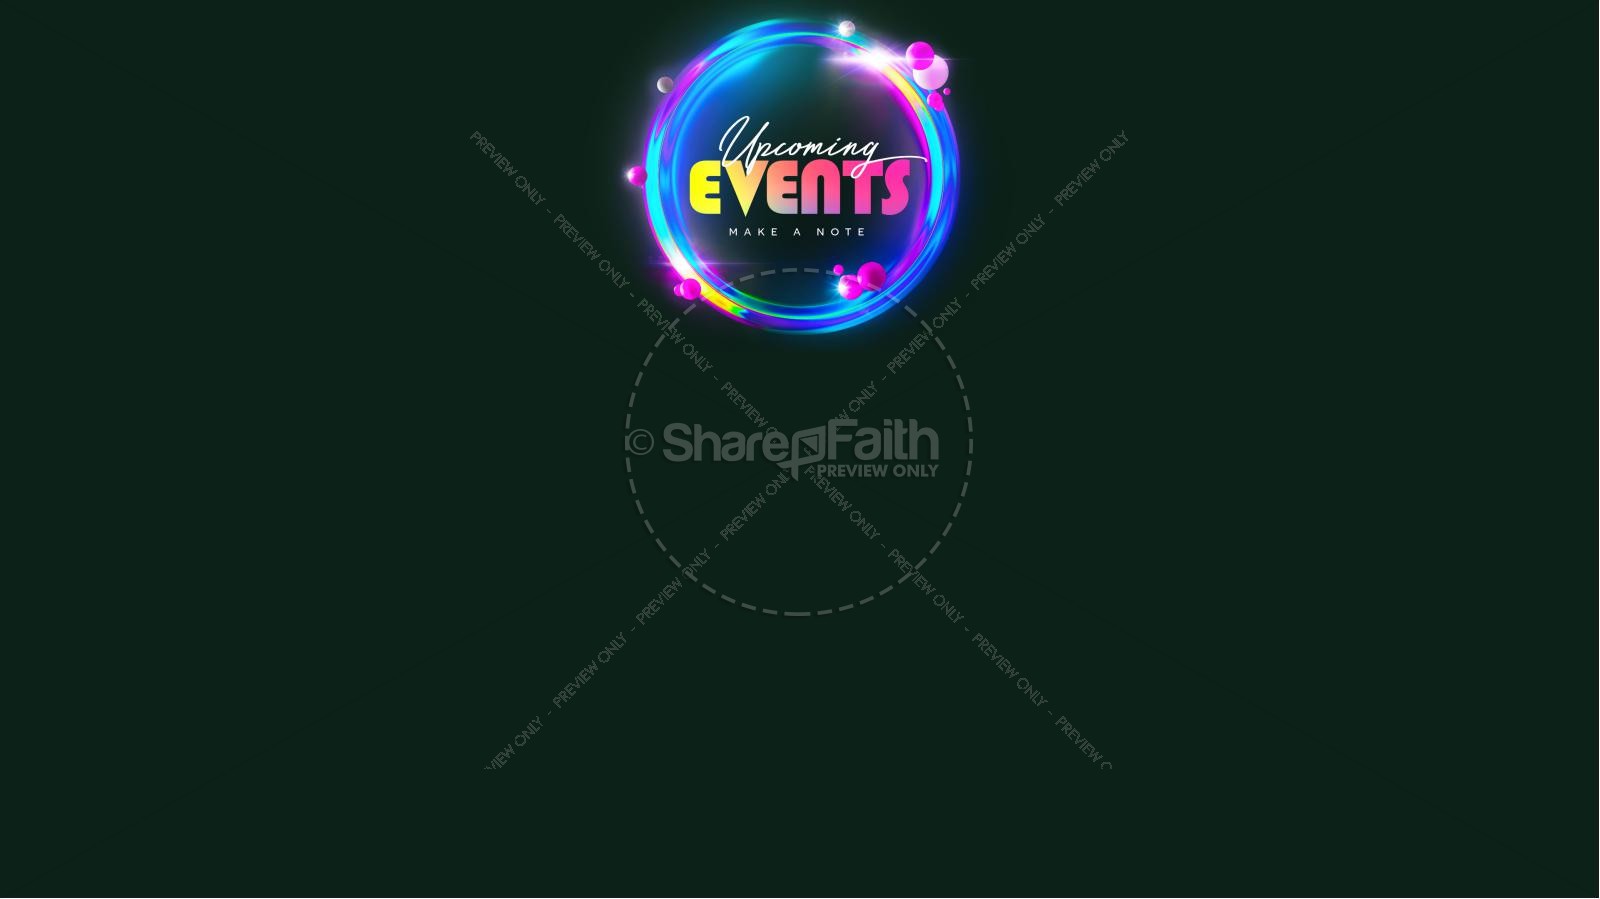 New Years Eve Party Neon Title Graphics